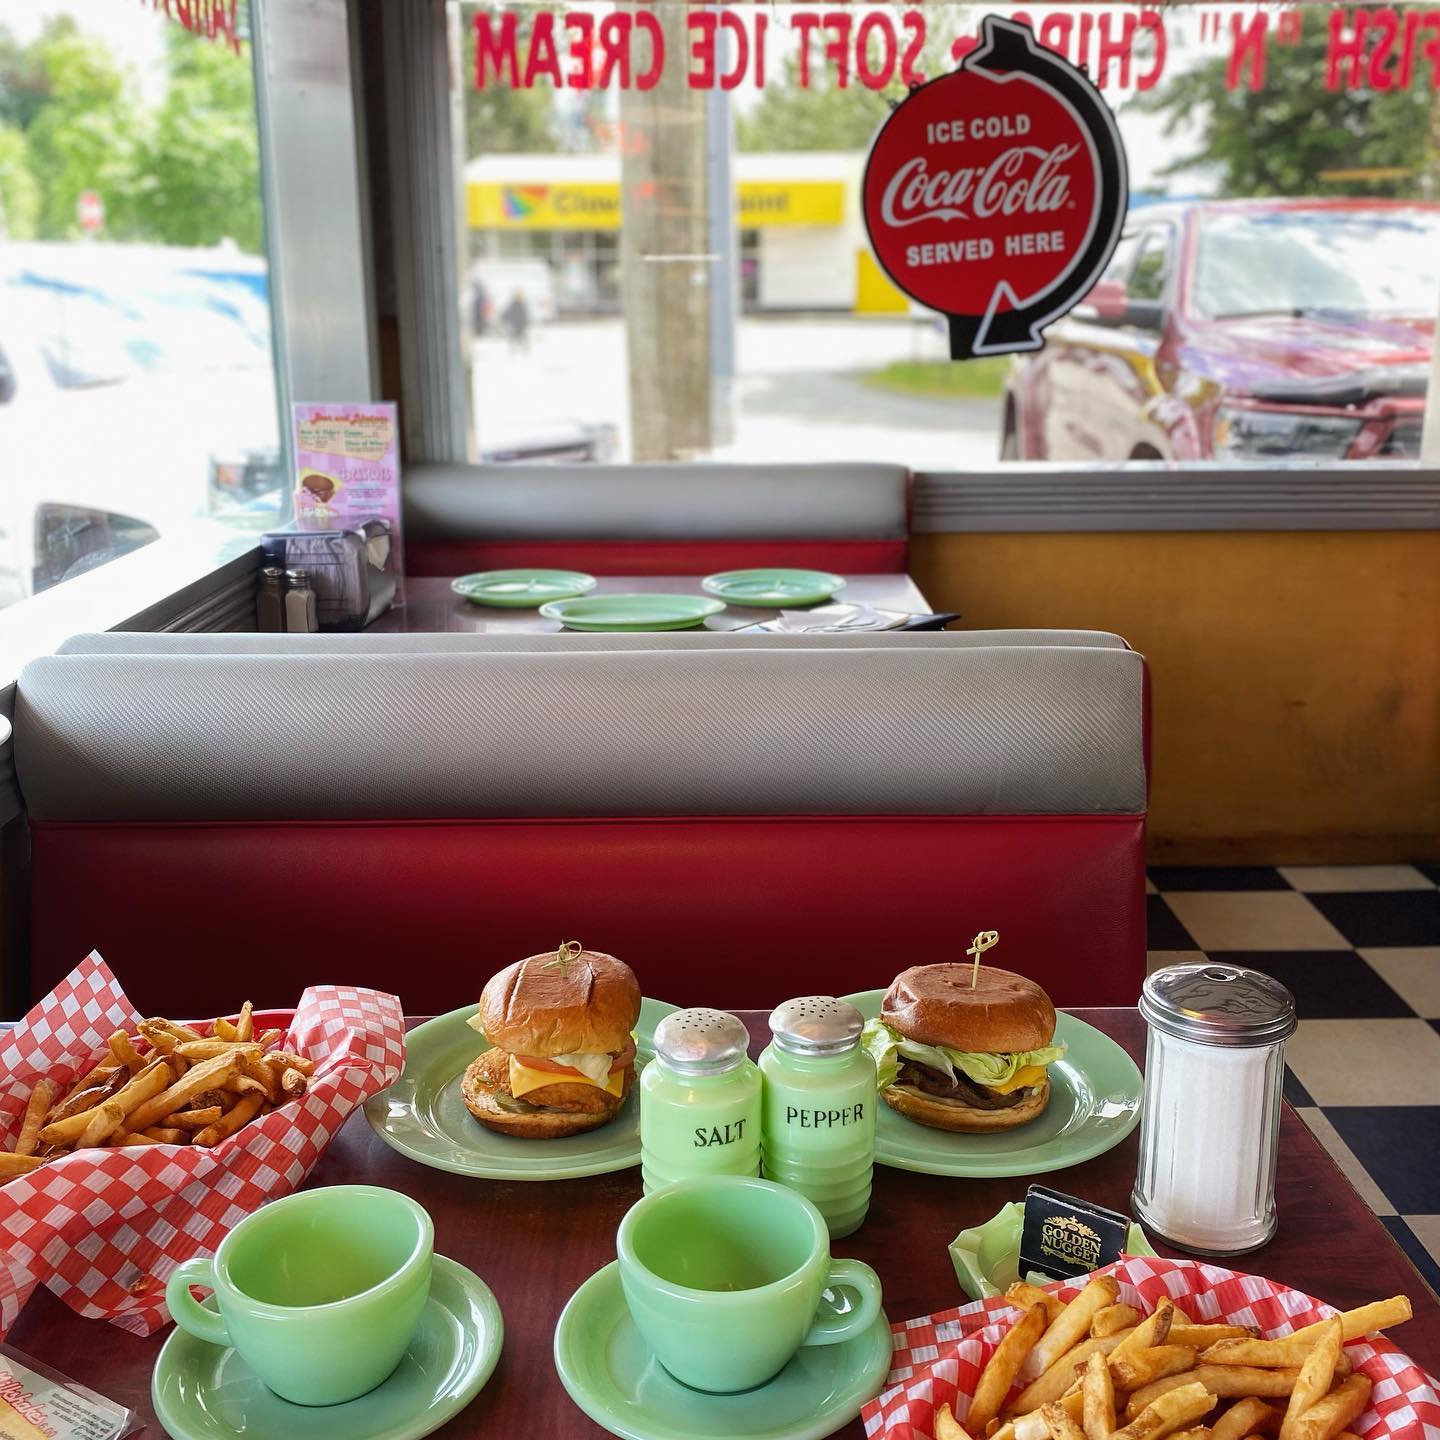 Fire-King Restaurant Ware staged at Rocko's Diner, Mission, BC, Canada